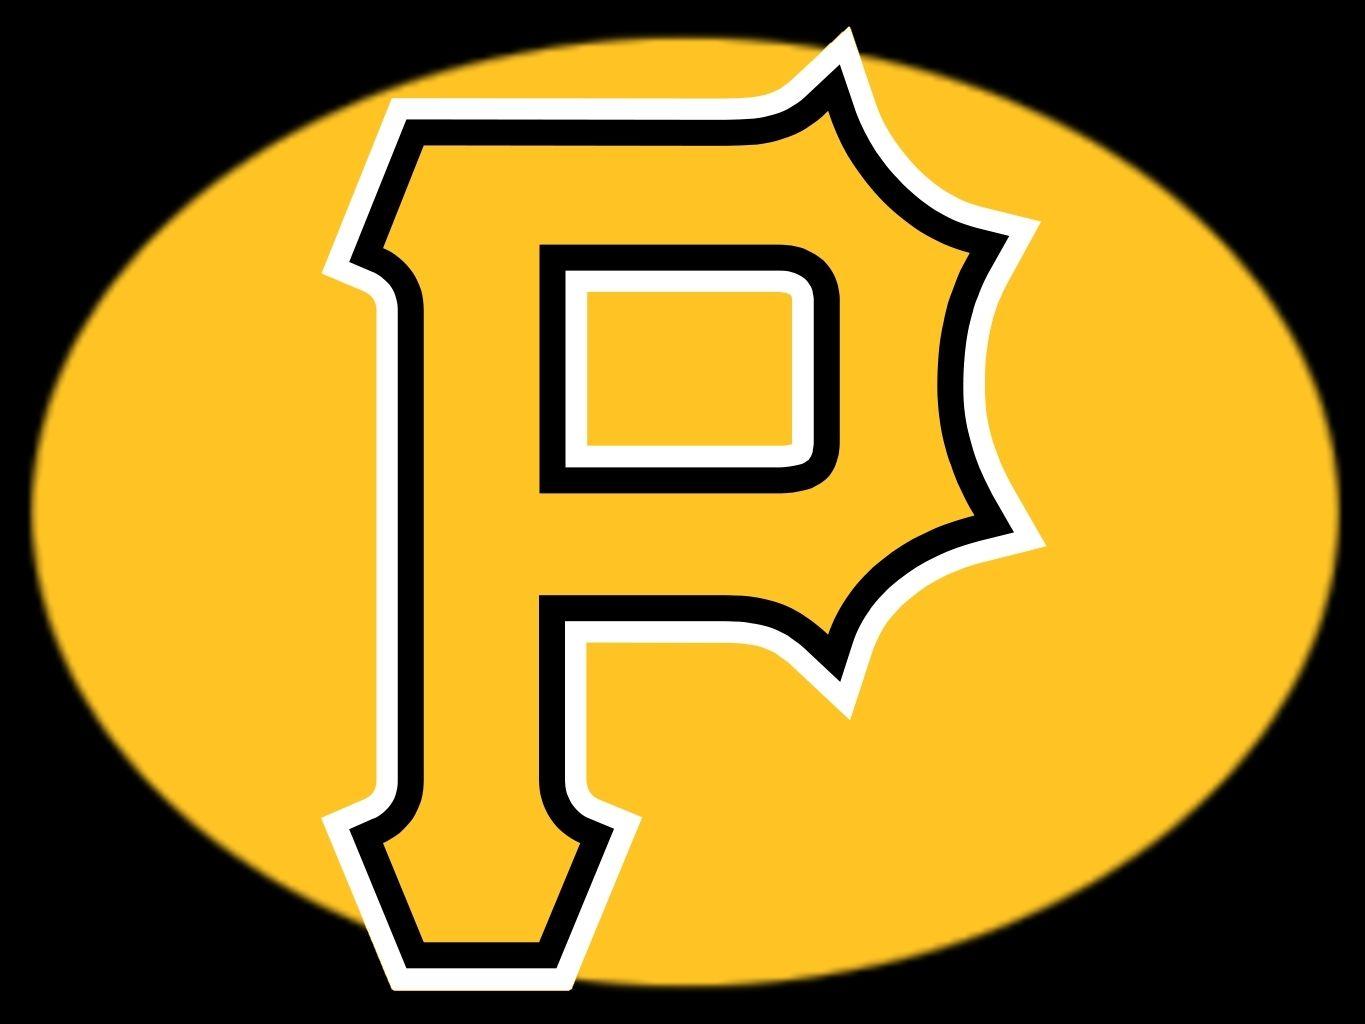 Pittsburgh Pirates And Wallpaper 1365x1024 (164.04 KB)